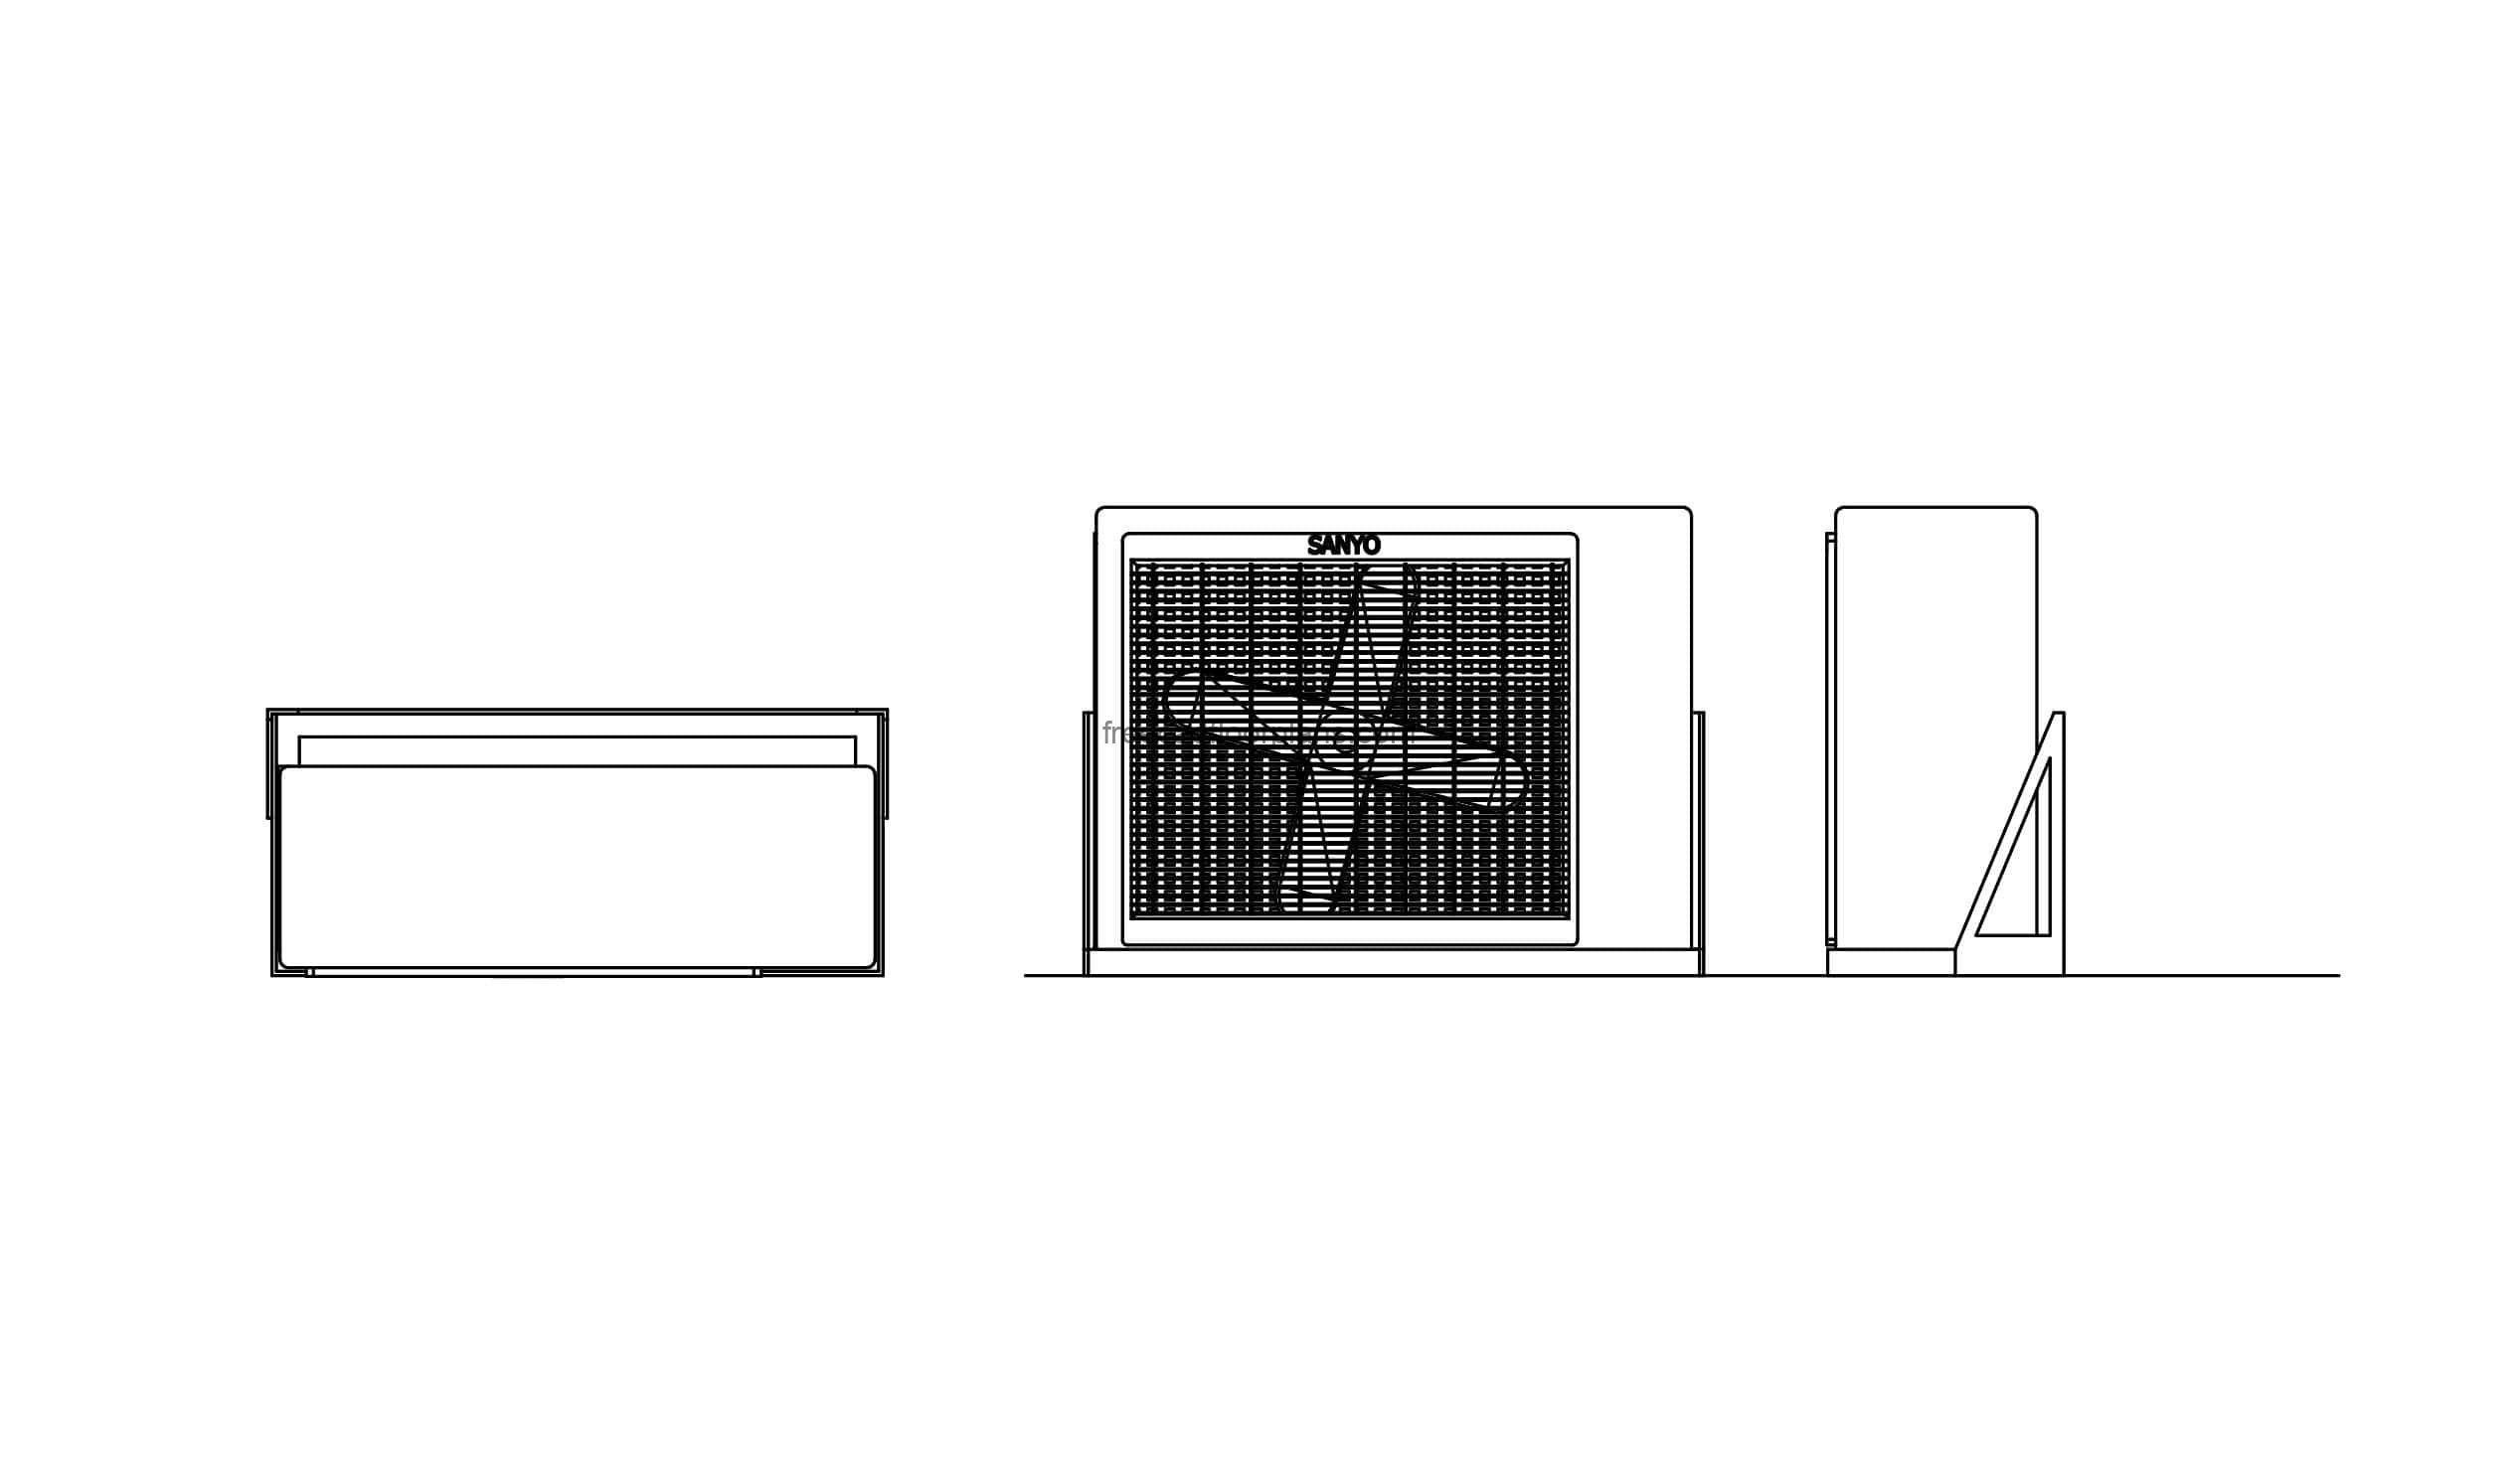 cad block of a external compressor wall mounted unit in dwg format file with all 2d views included free download